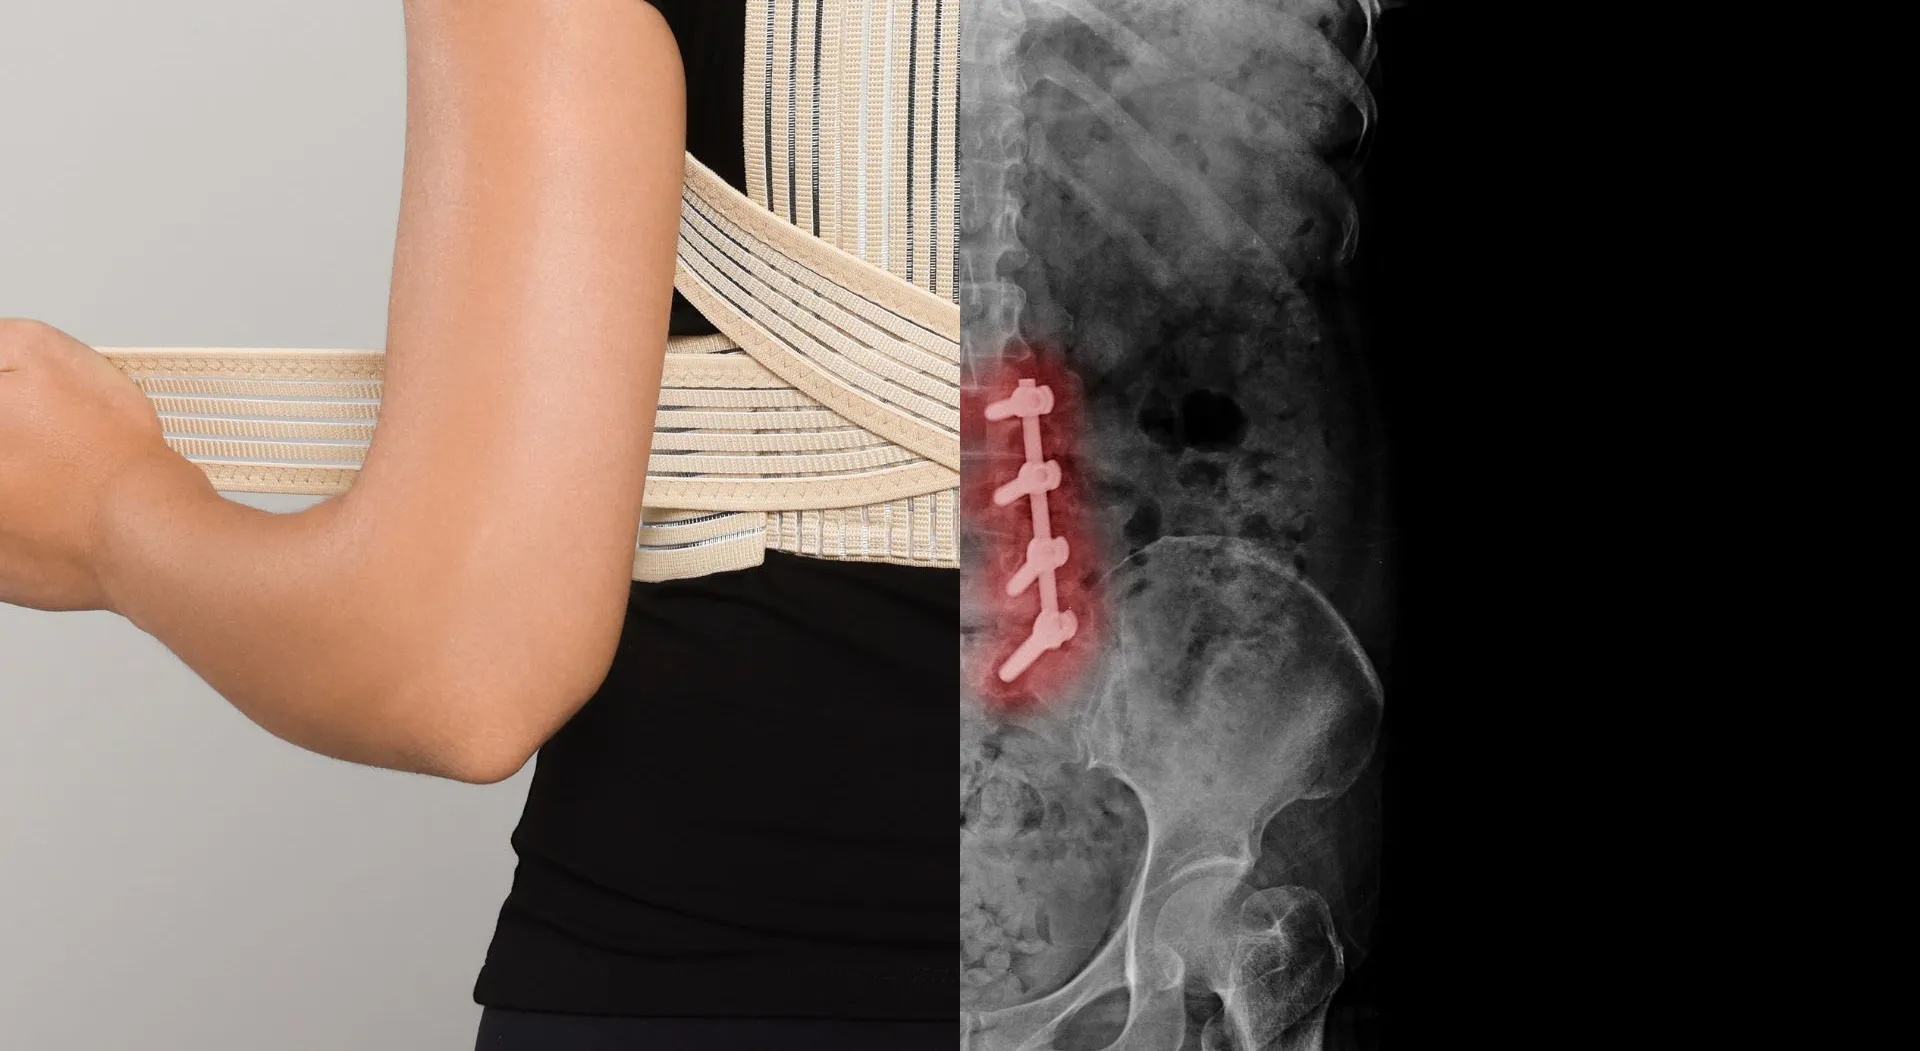 Spinal Alignment Tool: Self-Managing and Surgical Options